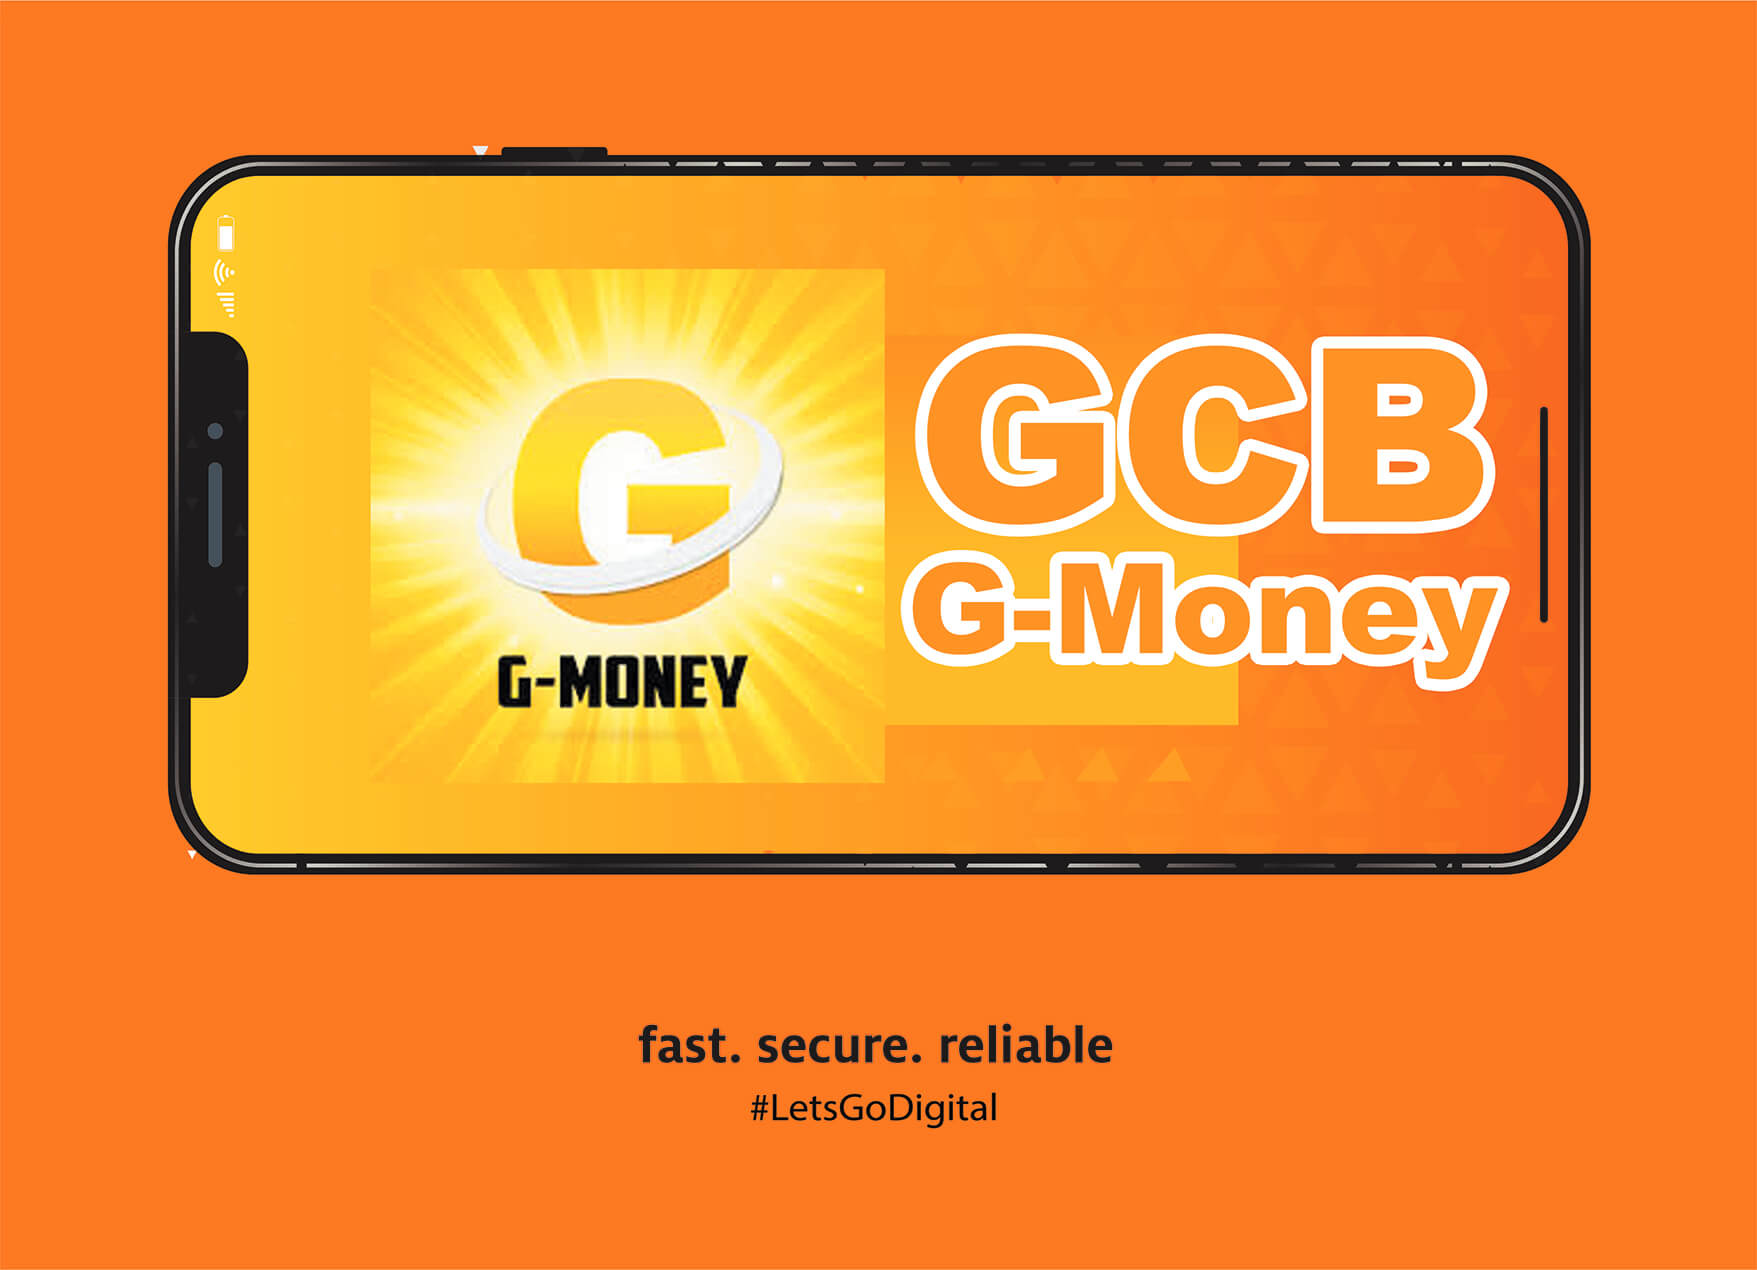 GCB G-Money: How To Register, Uses, Benefits And Charges Of The Mobile Money